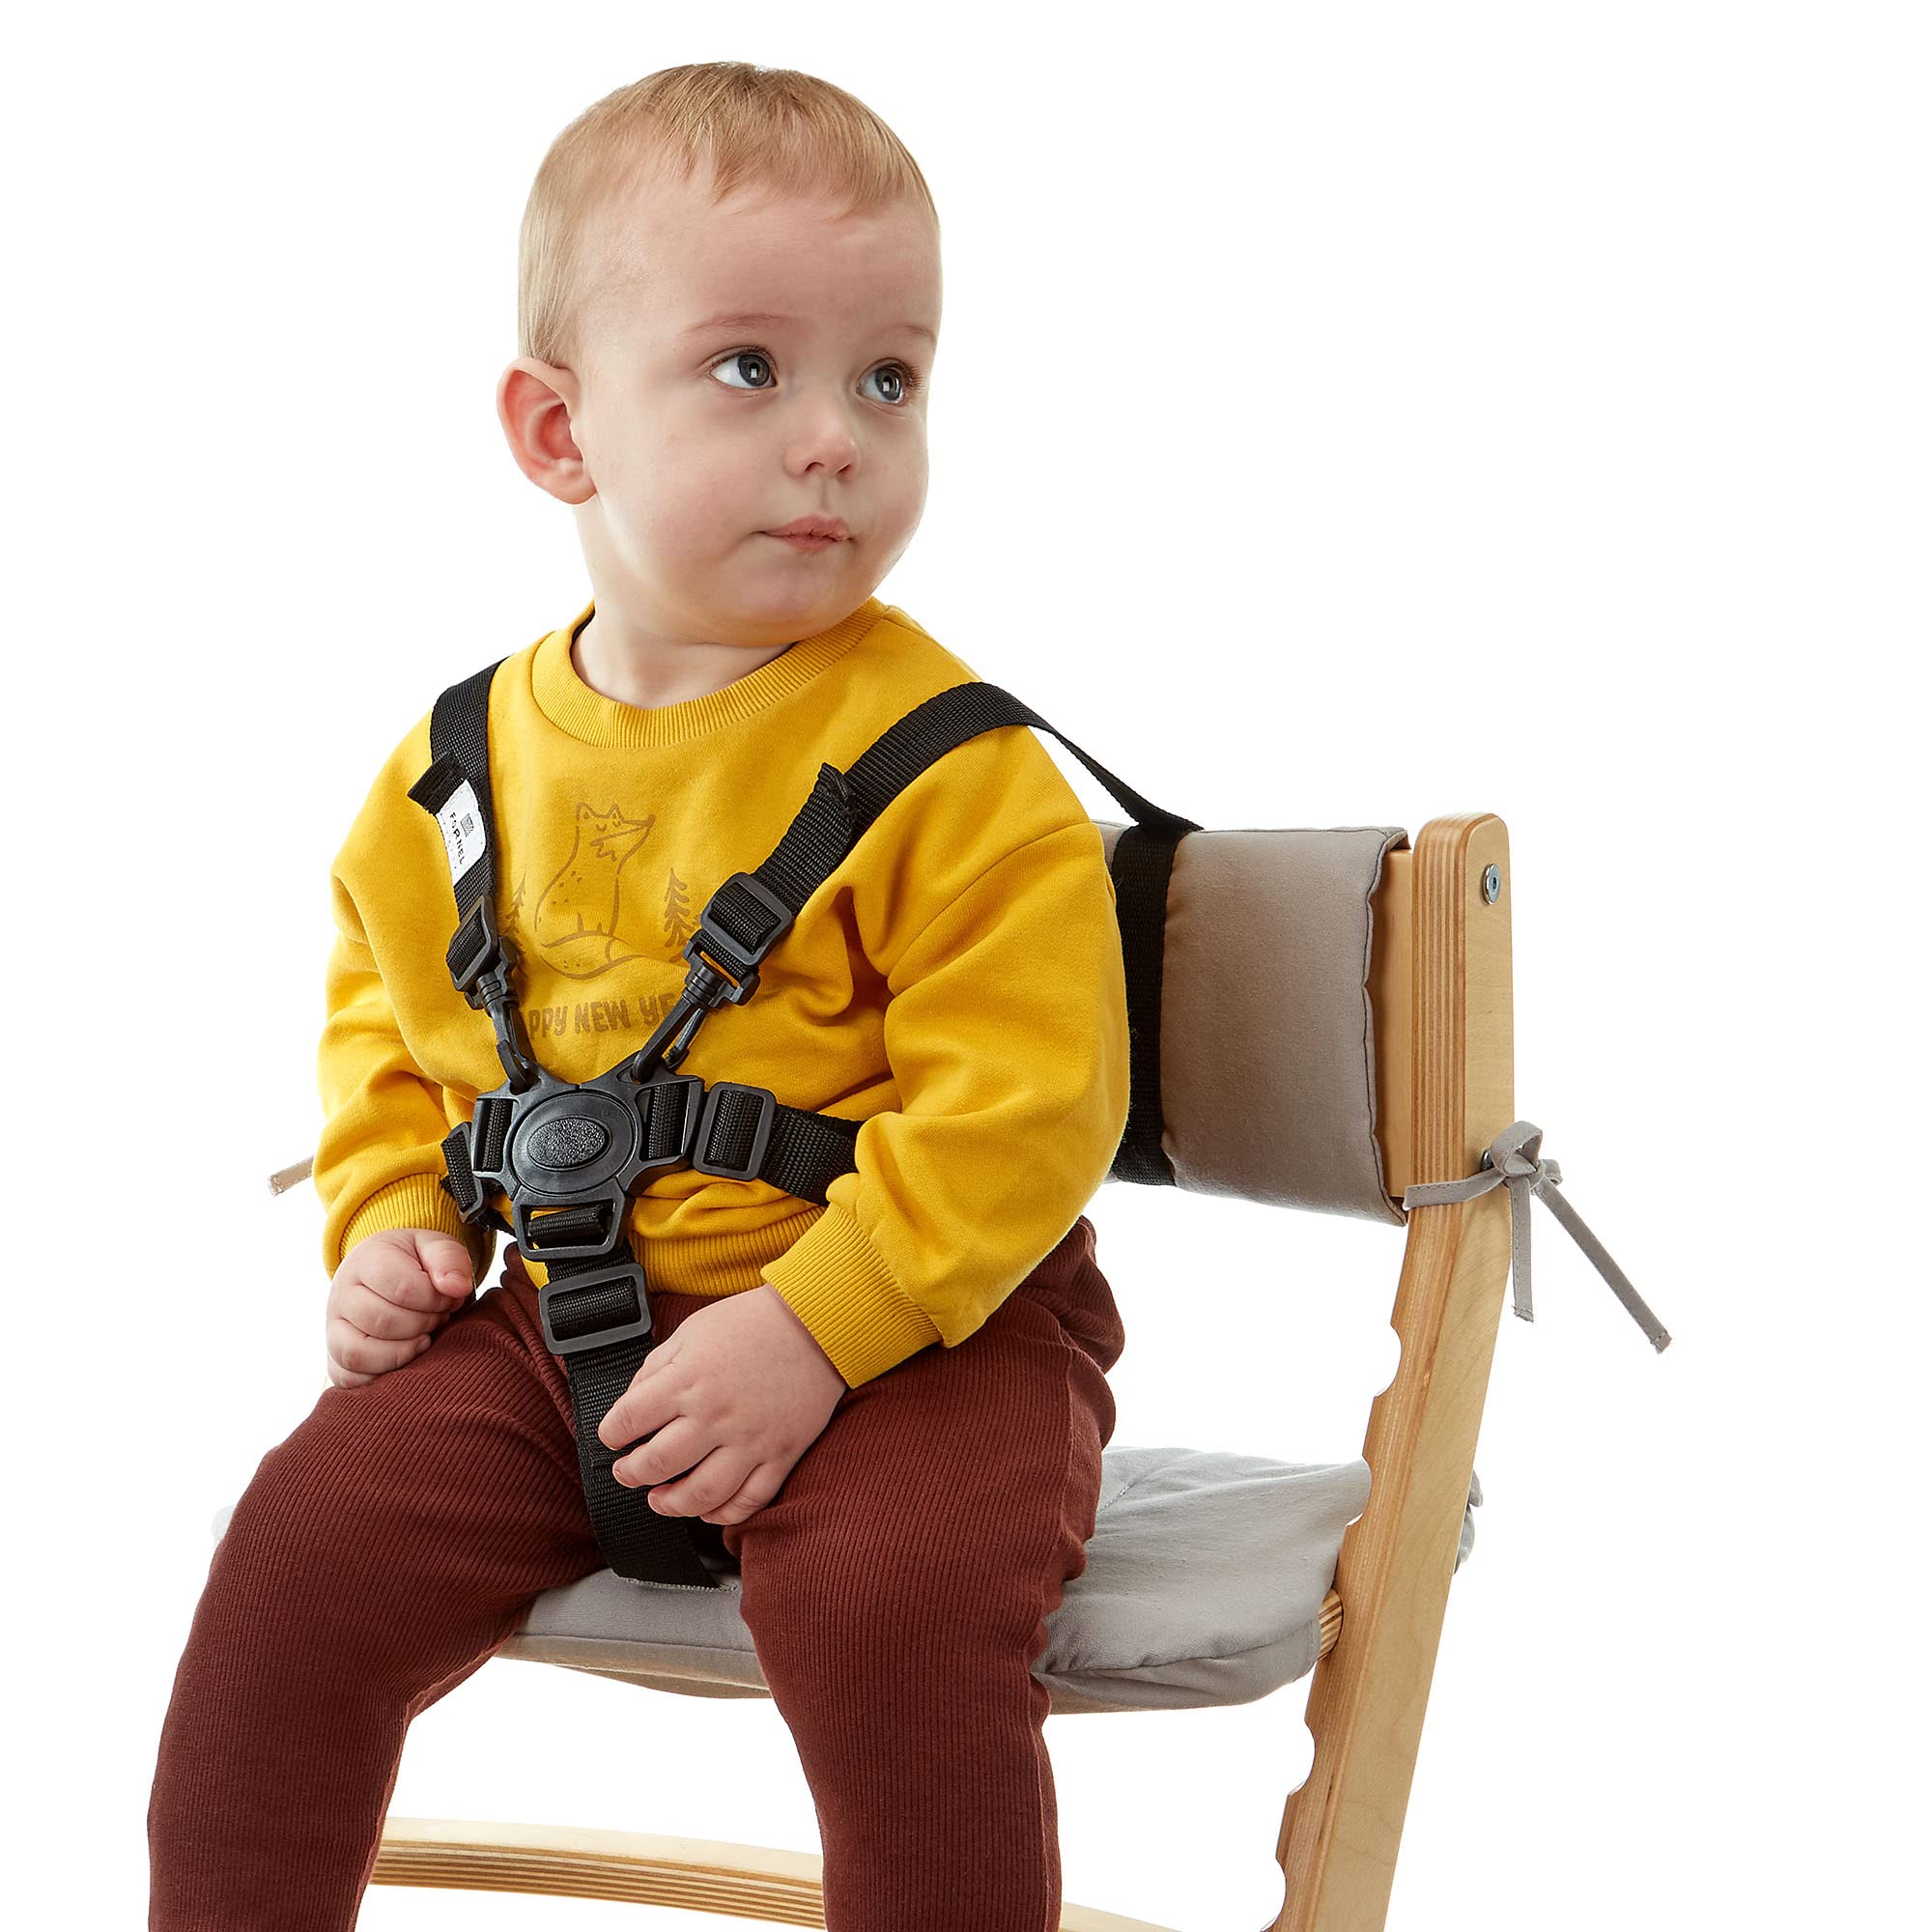 Fornel High Chair Straps, 5 Point Harness Strap for Adjustable Wooden Highchair for Toddlers